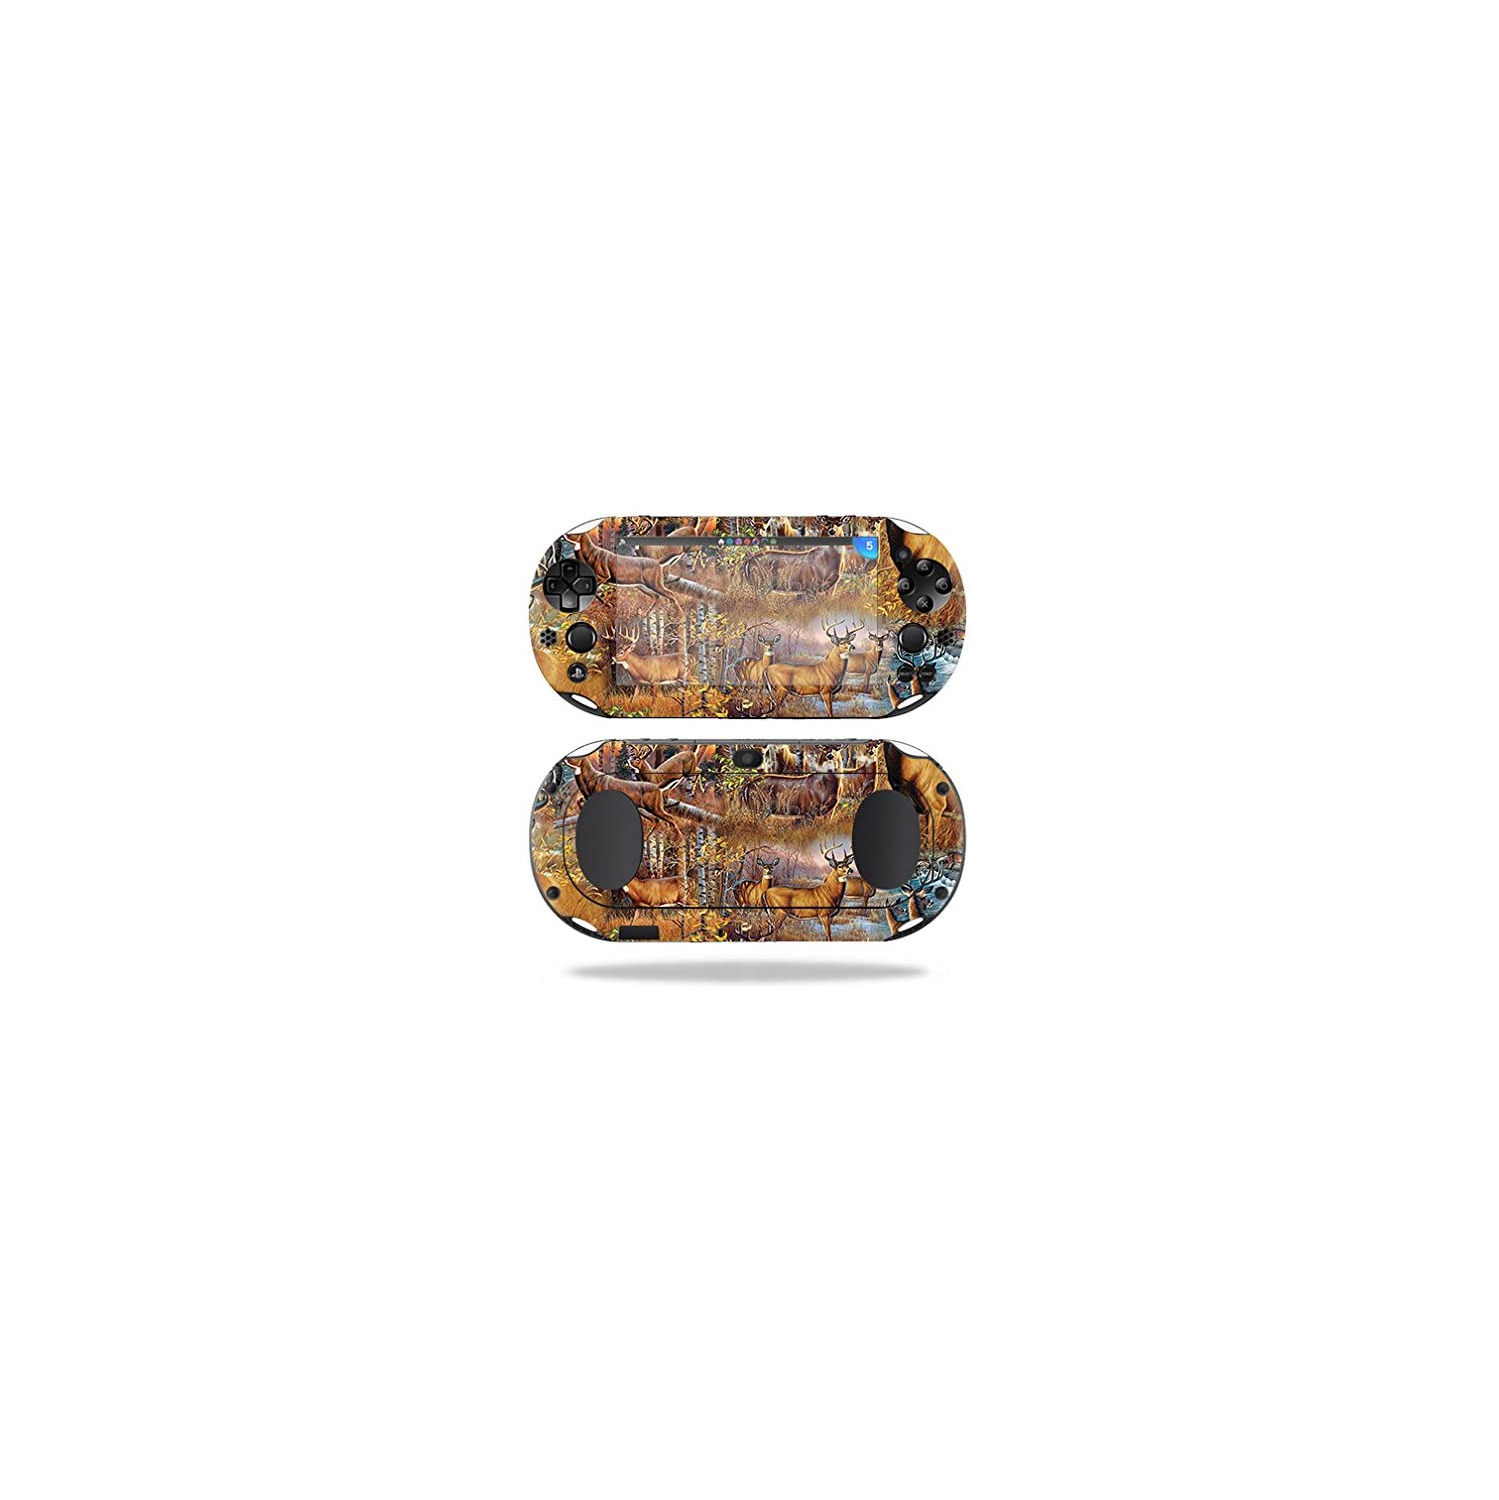 MightySkins Skin for Sony PS Vita (Wi-Fi 2nd Gen) â€“ Deer Pattern | Protective Viny wrap | Easy to Apply and Change Style | Made in the USA